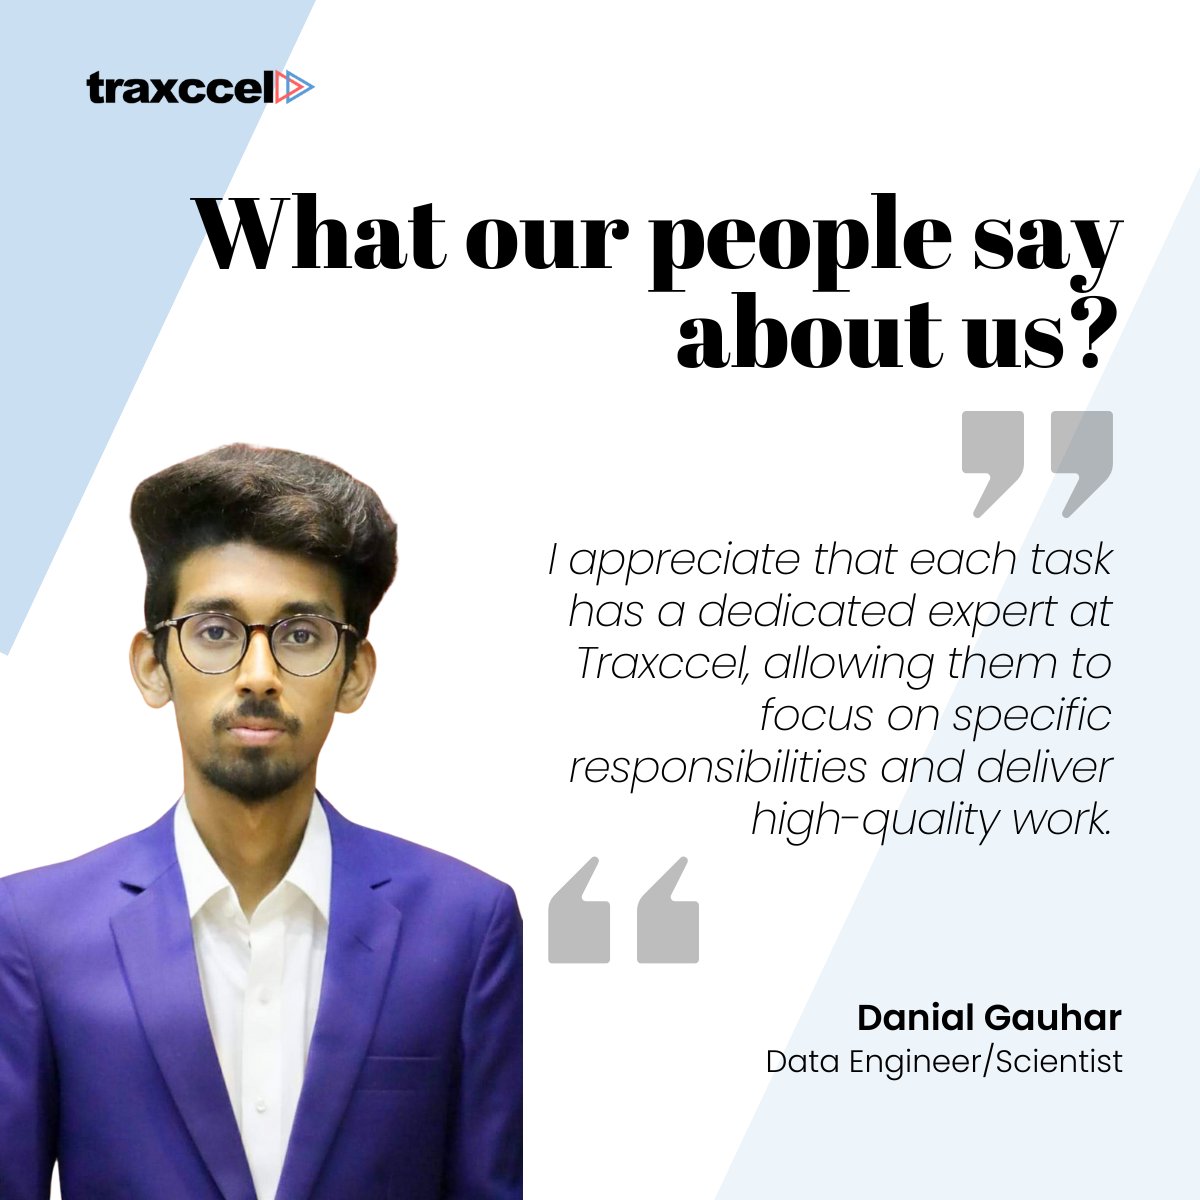 We believe that our success is fueled by the talent and dedication of our people.

Hear what one of our team members says about us.

Learn more at: traxccel.com/aboutus

#peoplespotlight #ourpeople #teammember #peoplefirst #employeegrowth #traxccel